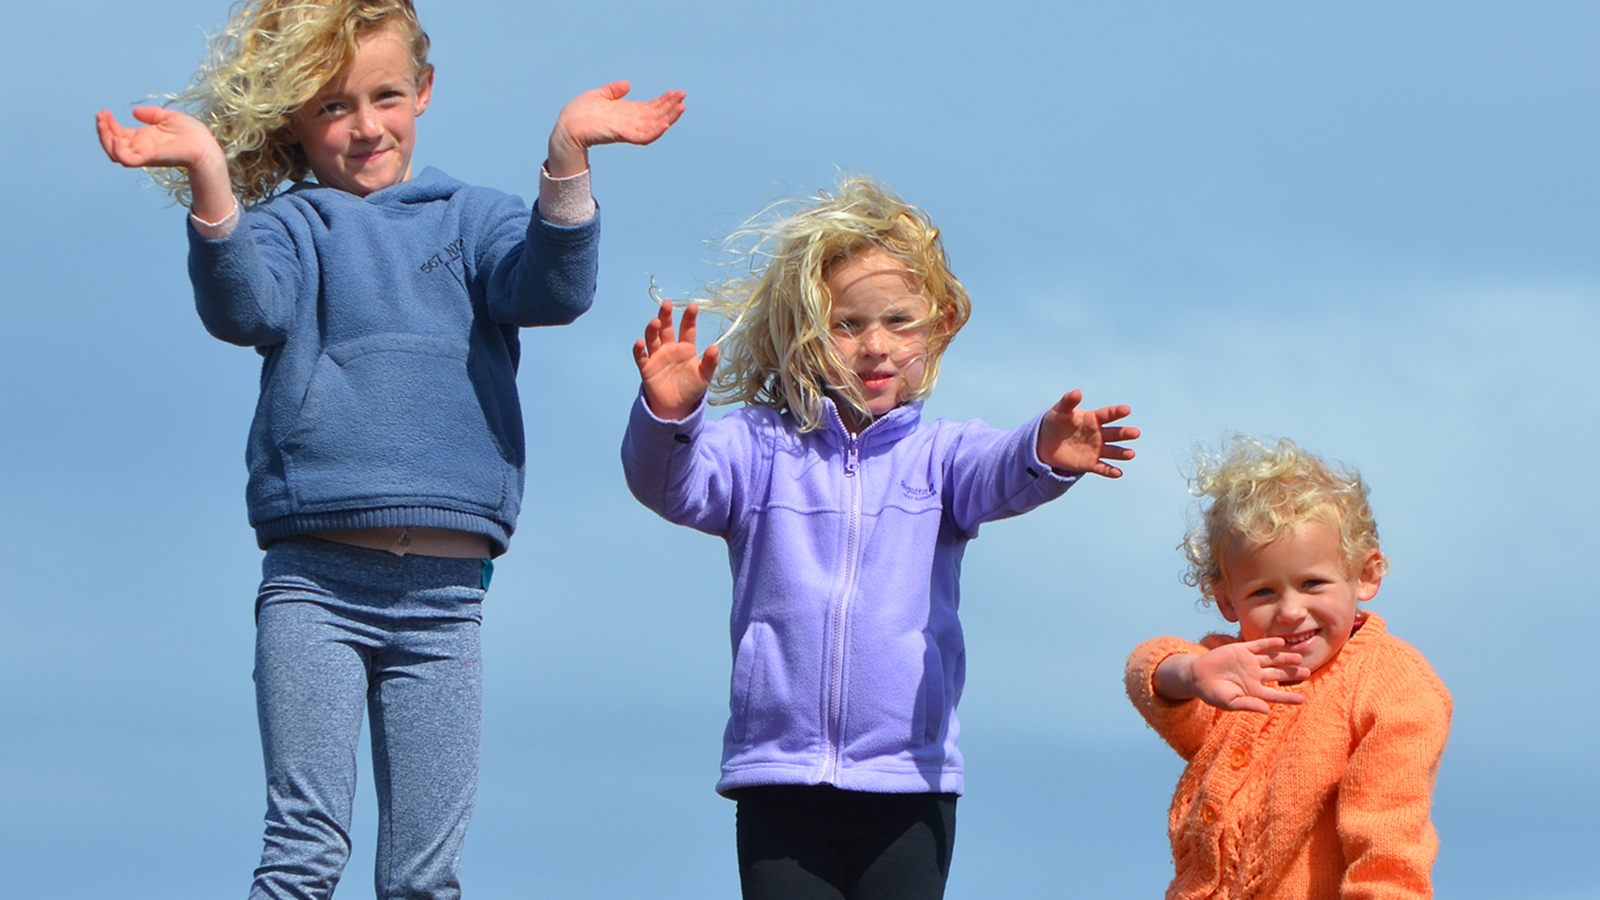 You got: Middle Child! I Bet We Can Correctly Guess Your Birth Order With This Quiz